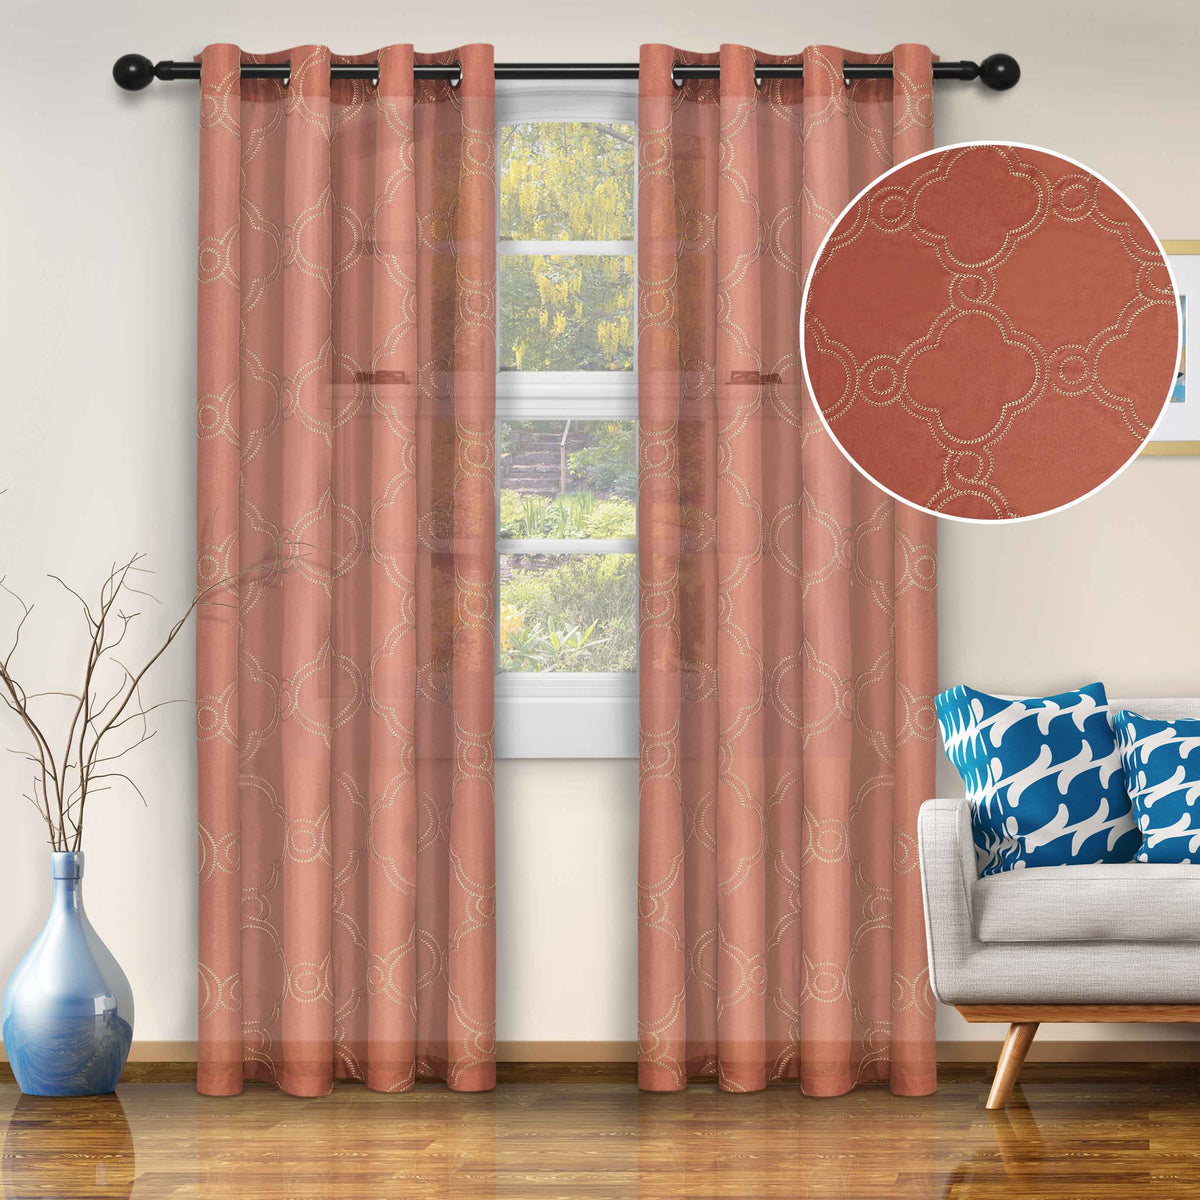 Embroidered Moroccan Sheer Grommet Curtain Panel Set - Rust